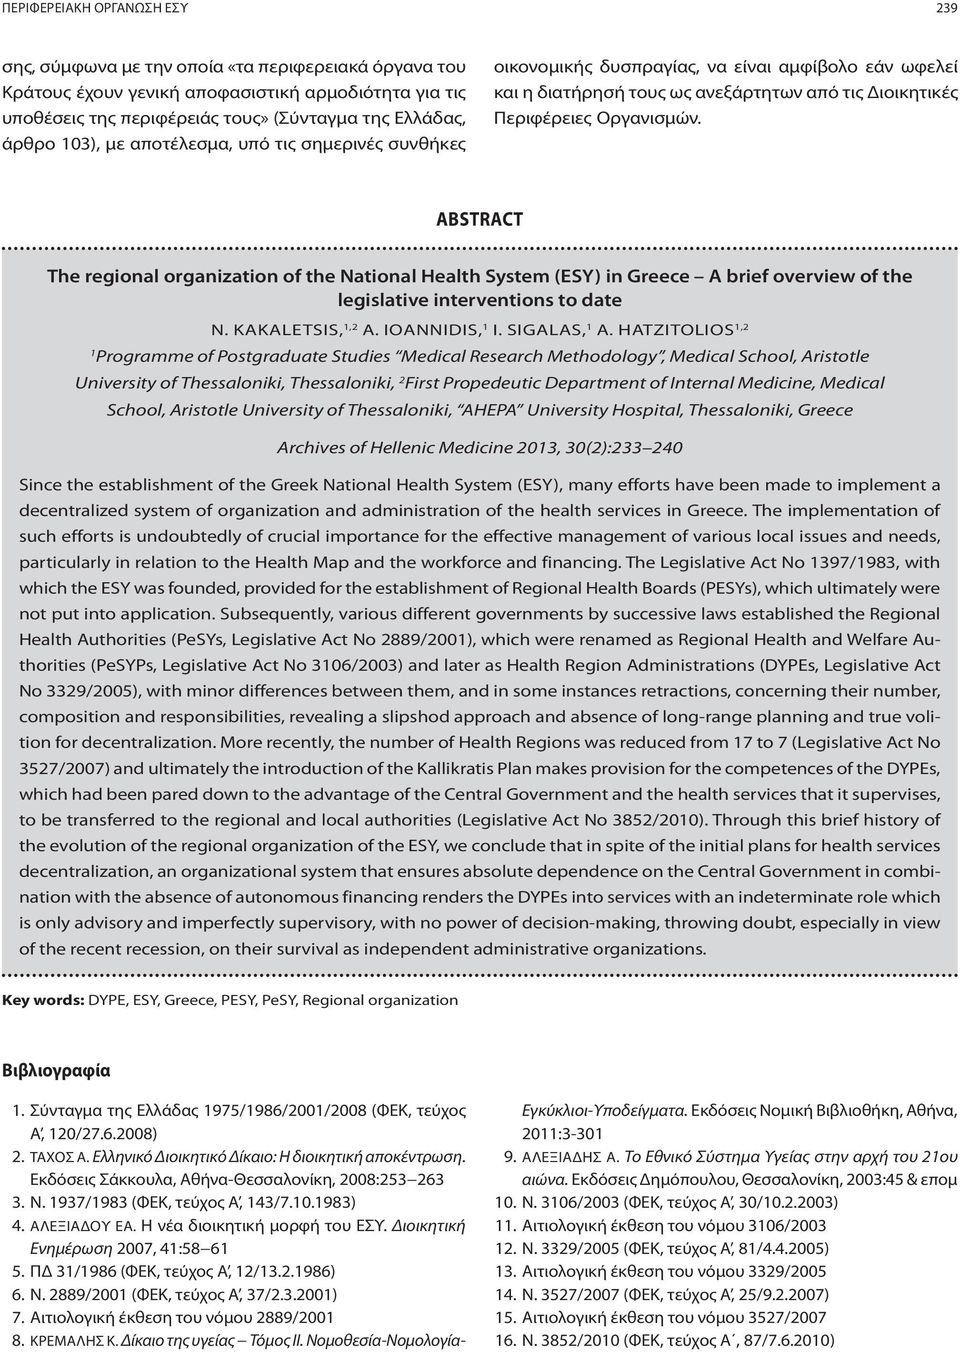 ABSTRACT The regional organization of the National Health System (ESY) in Greece A brief overview of the legislative interventions to date N. KAKALETSIS, 1,2 A. IOANNIDIS, 1 I. SIGALAS, 1 A.